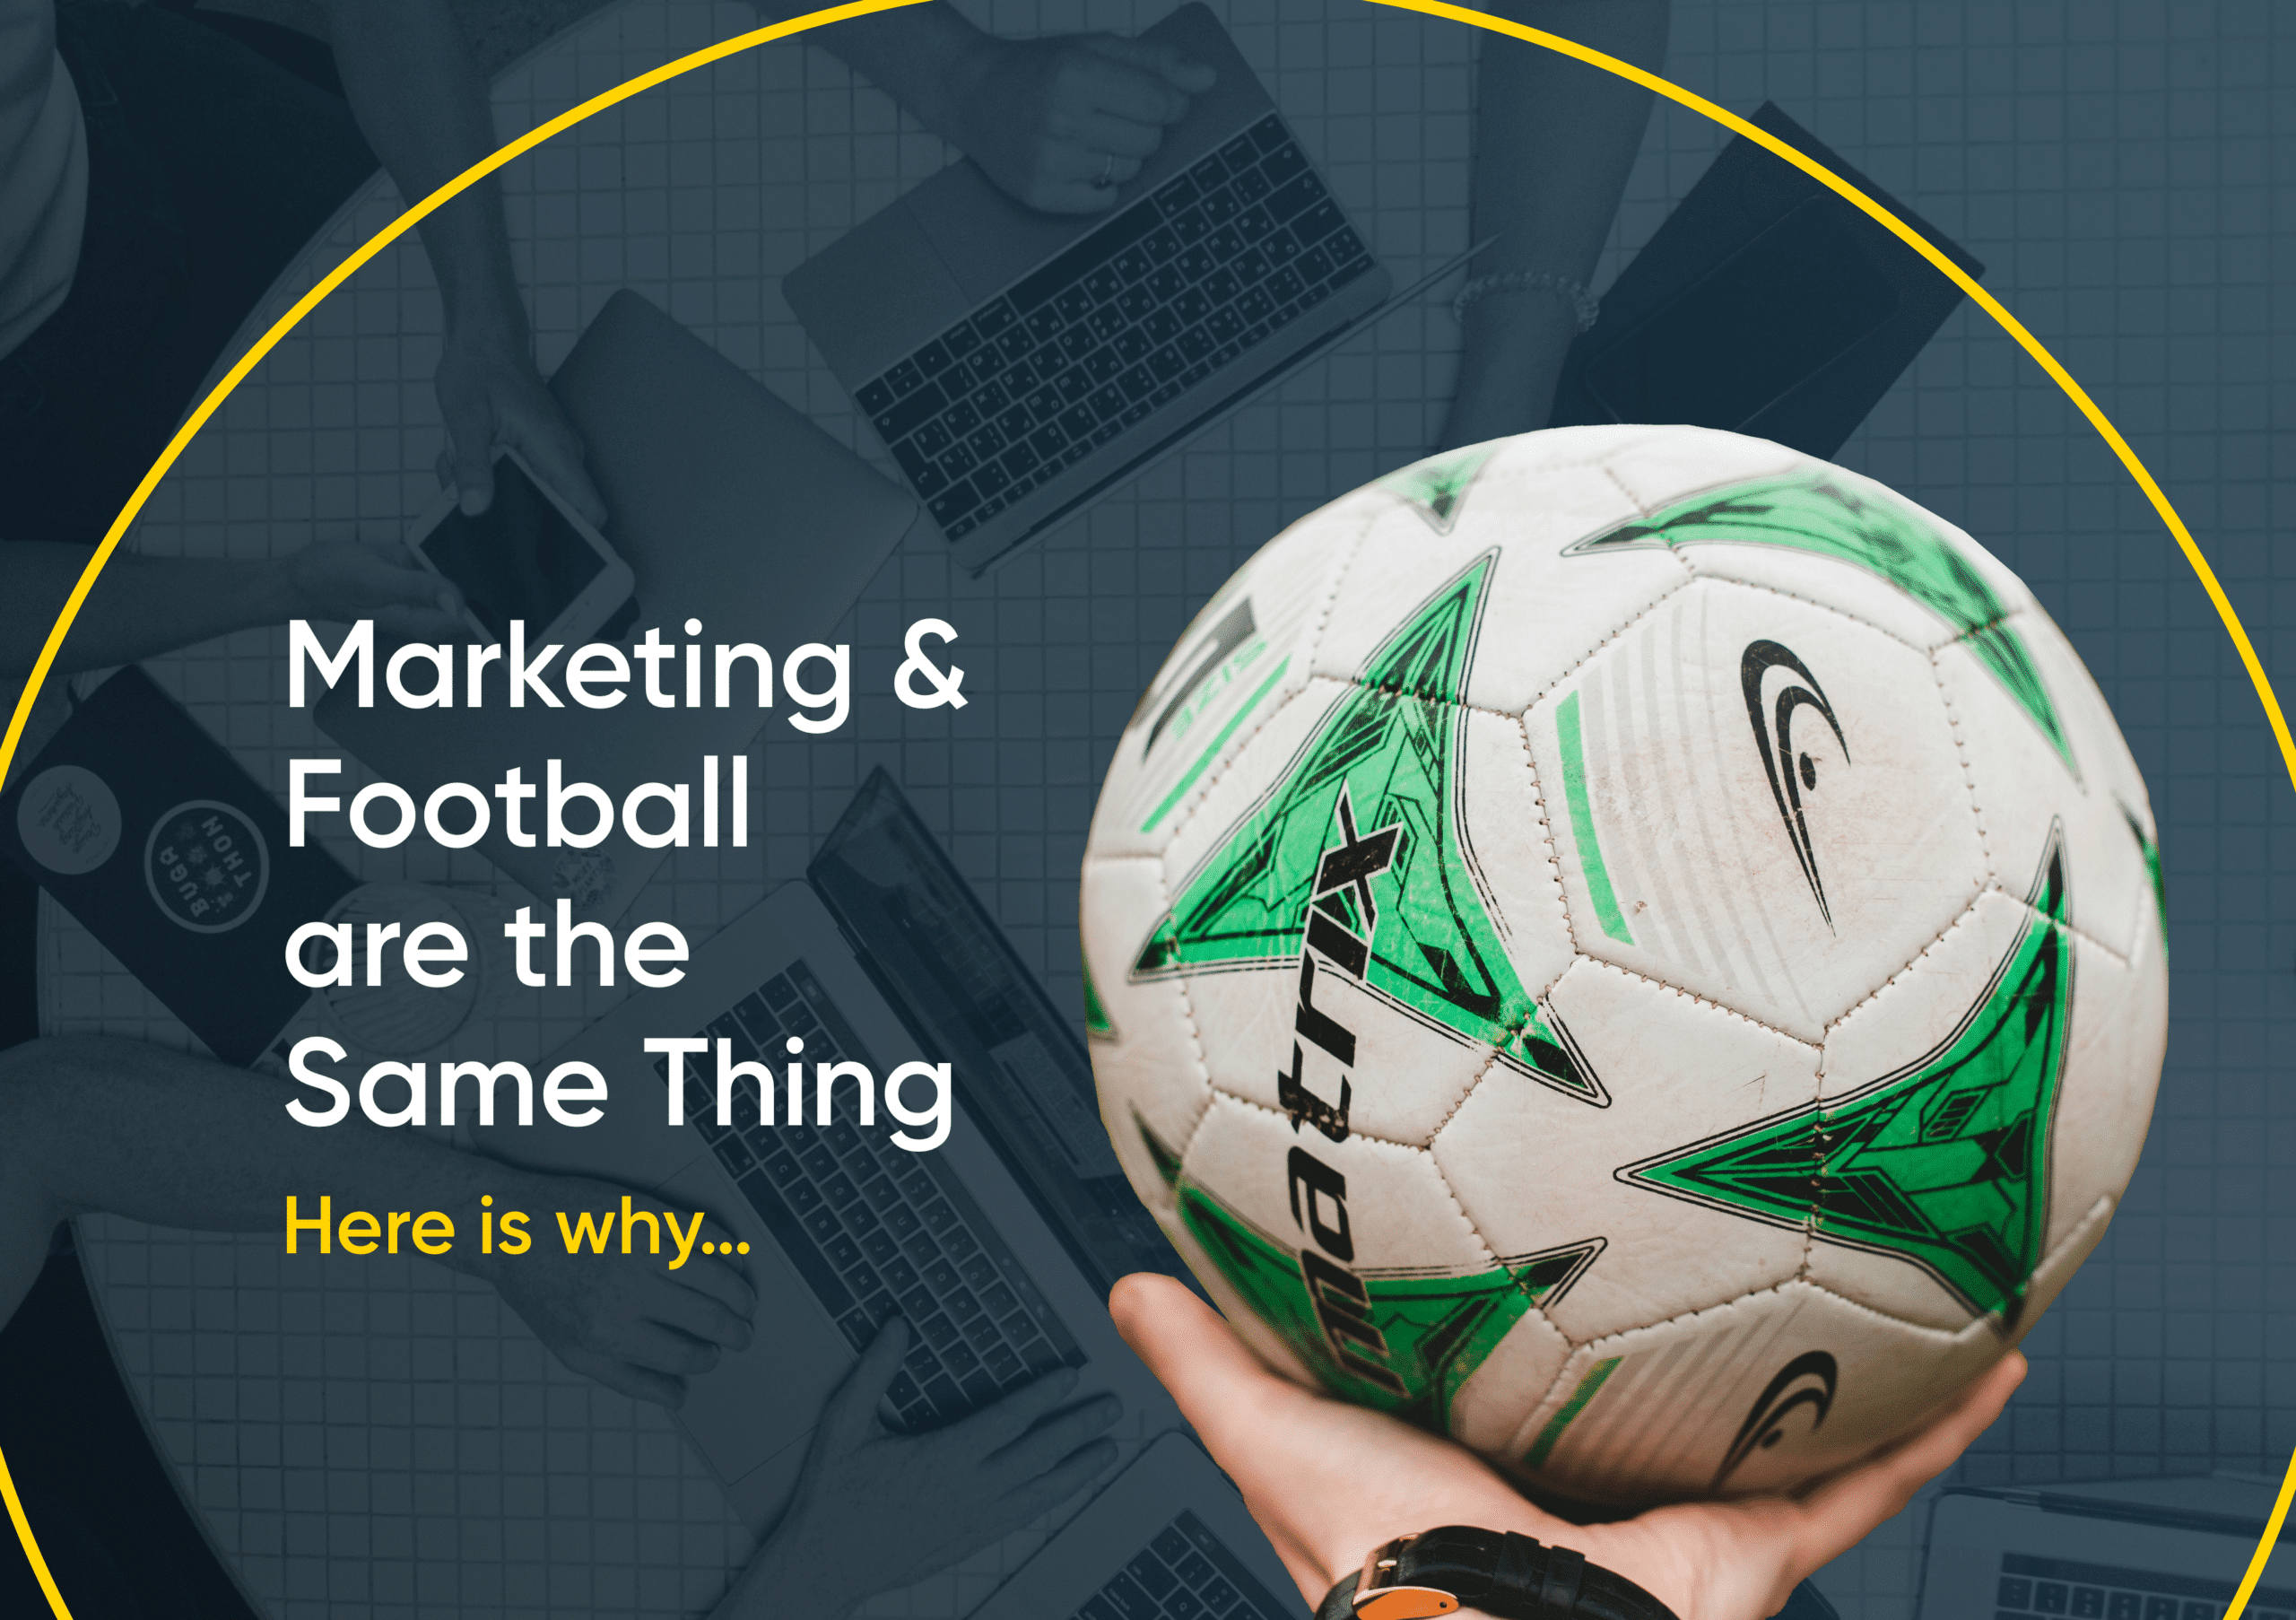 Marketing & Football are the Same Thing – Here’s Why